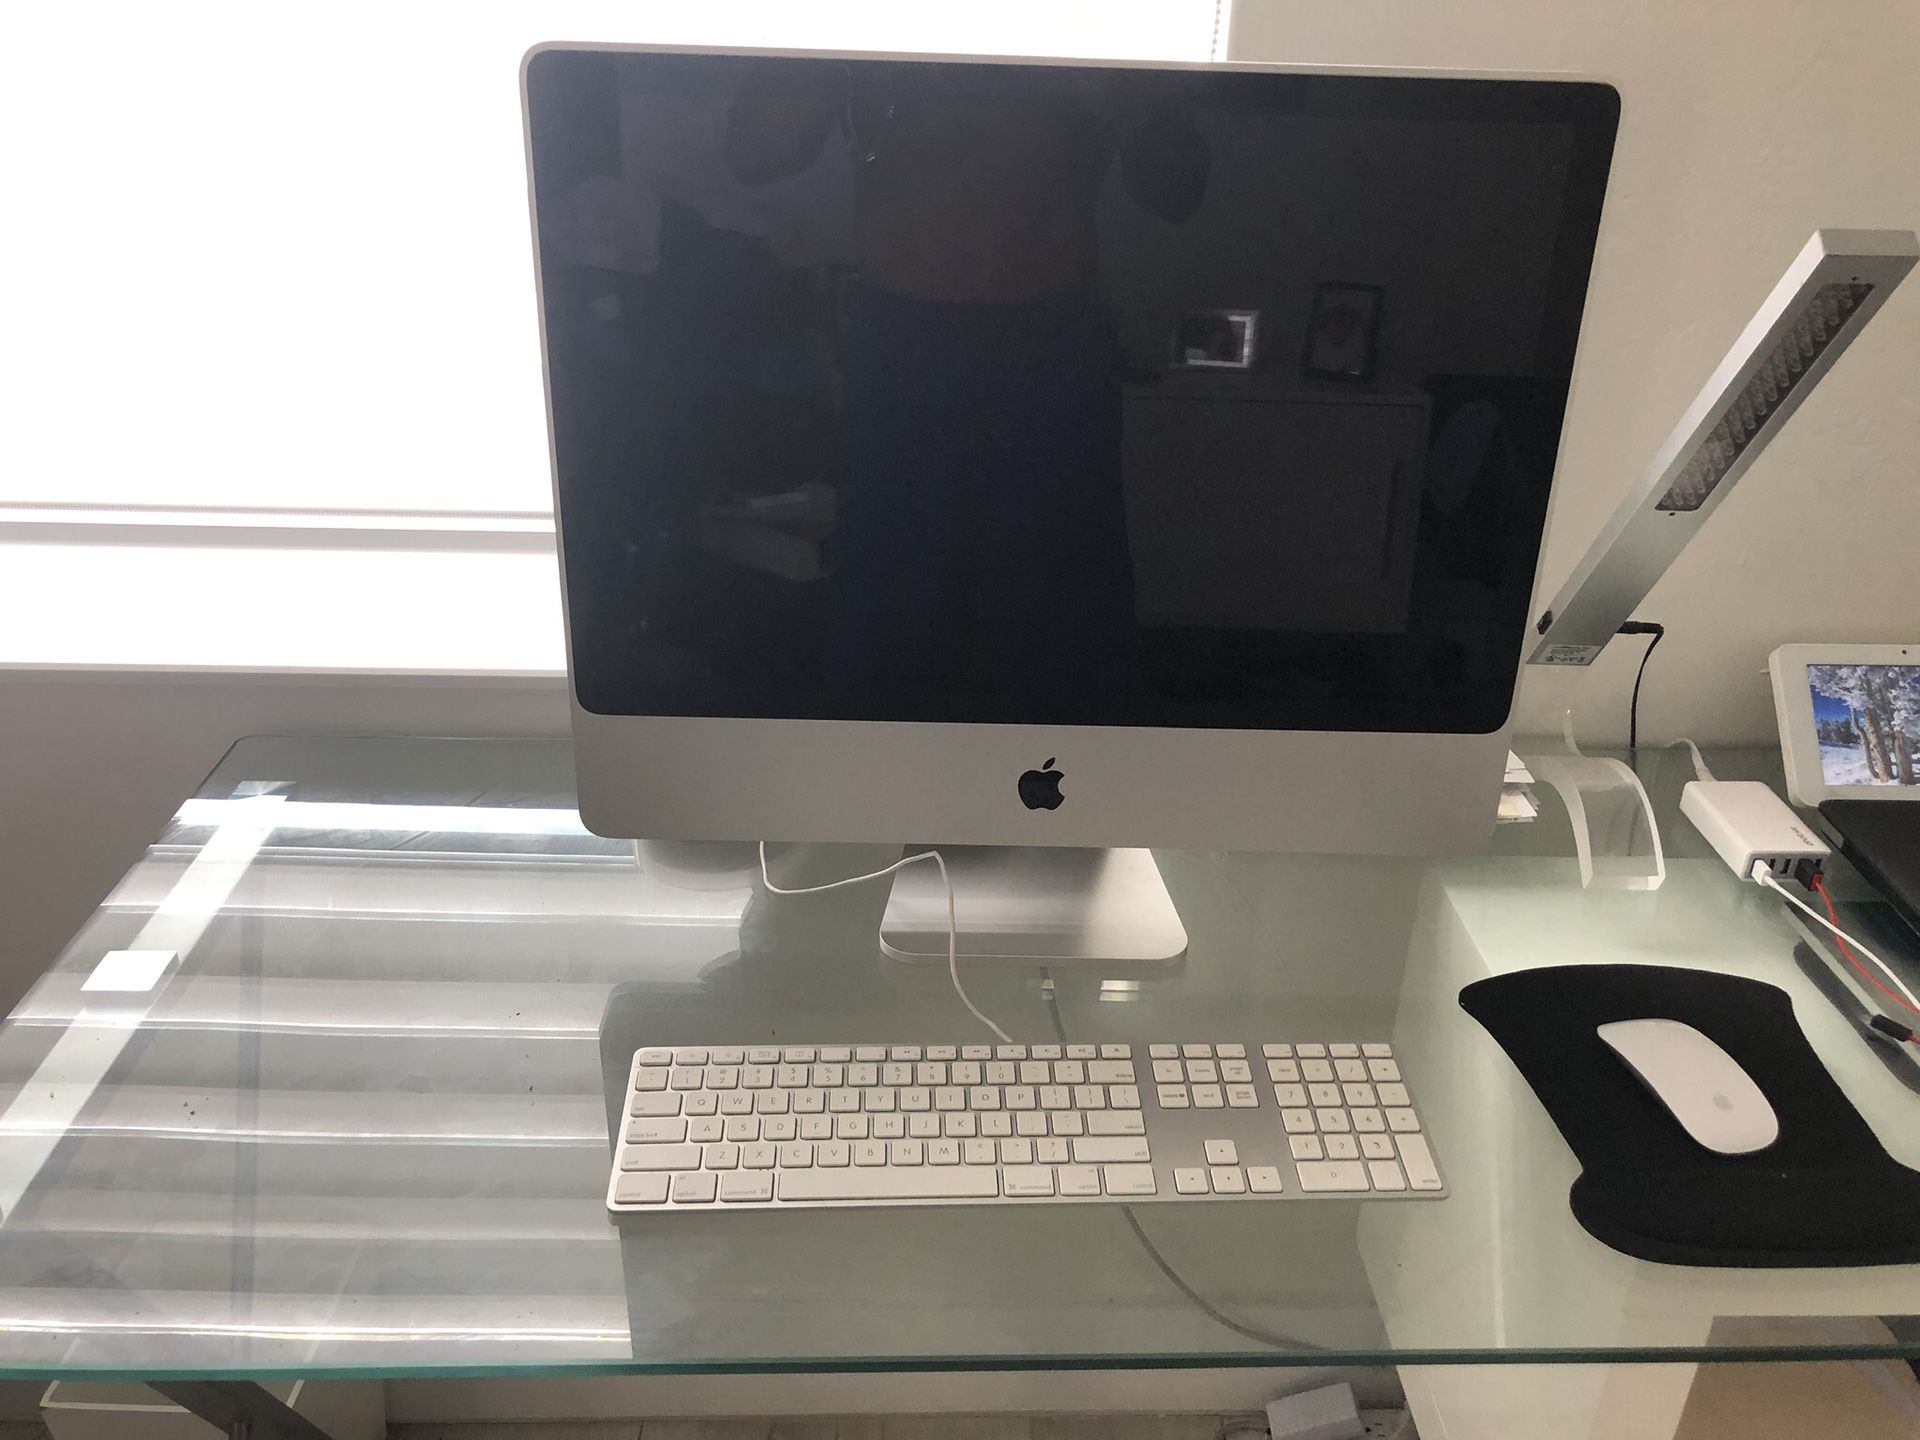 IMac in Great Condition